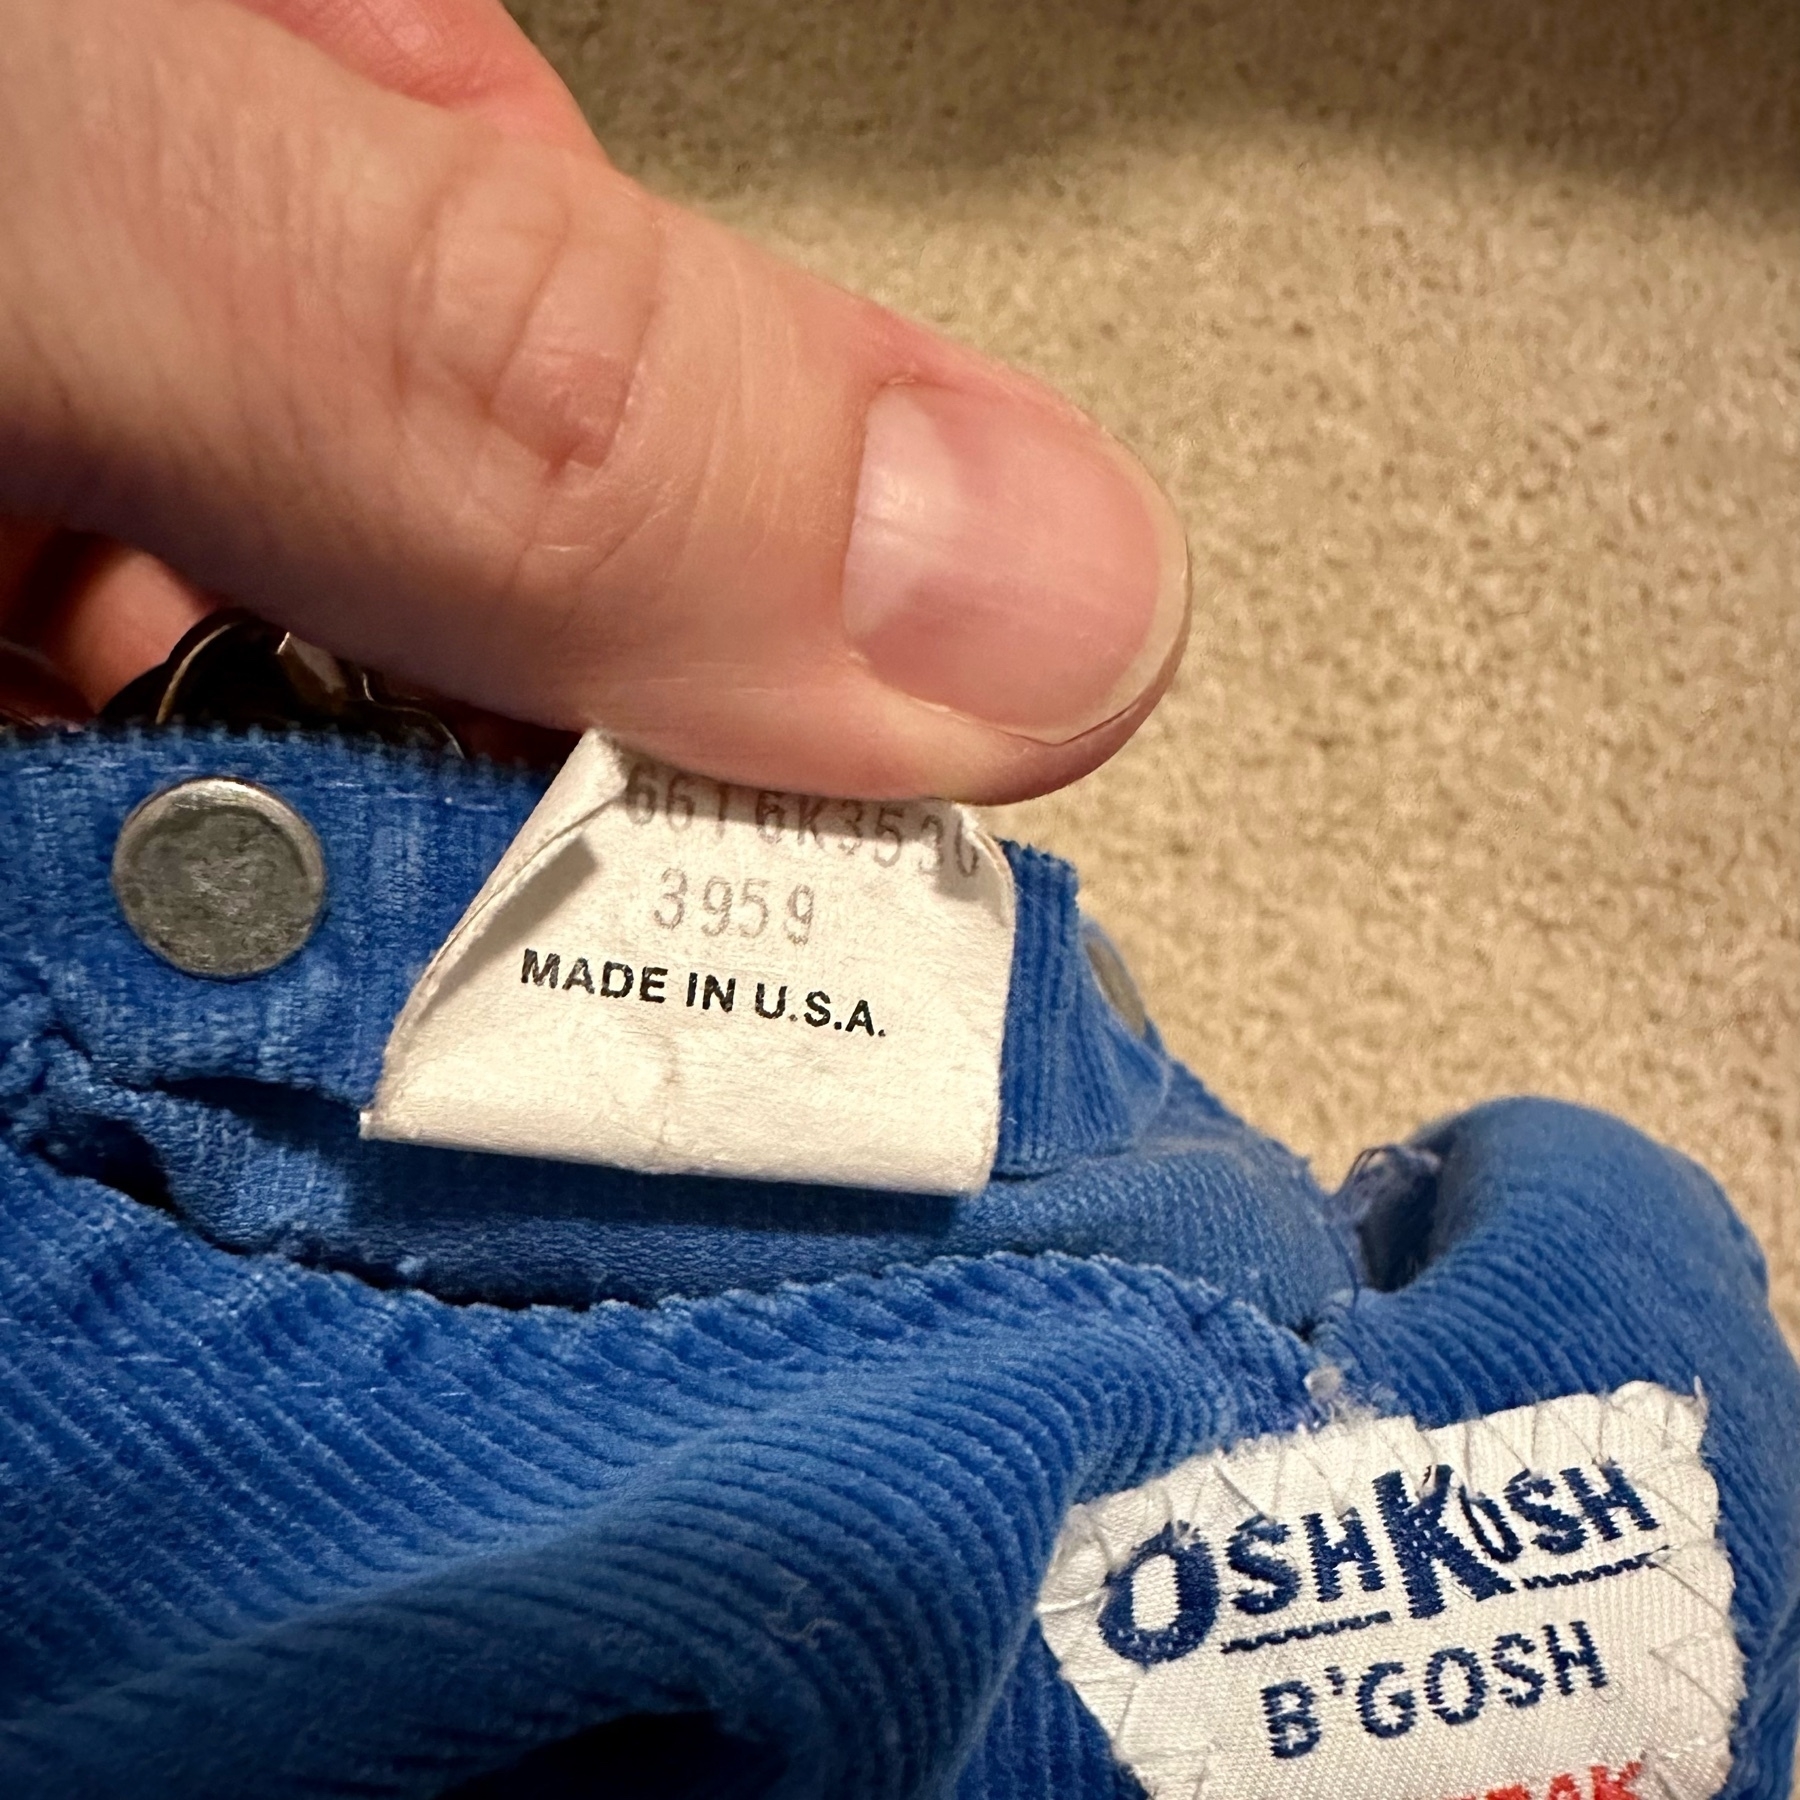 A pair of OshKosh B'gosh baby's overalls, closeup on the label, which says "Made in U.S.A."